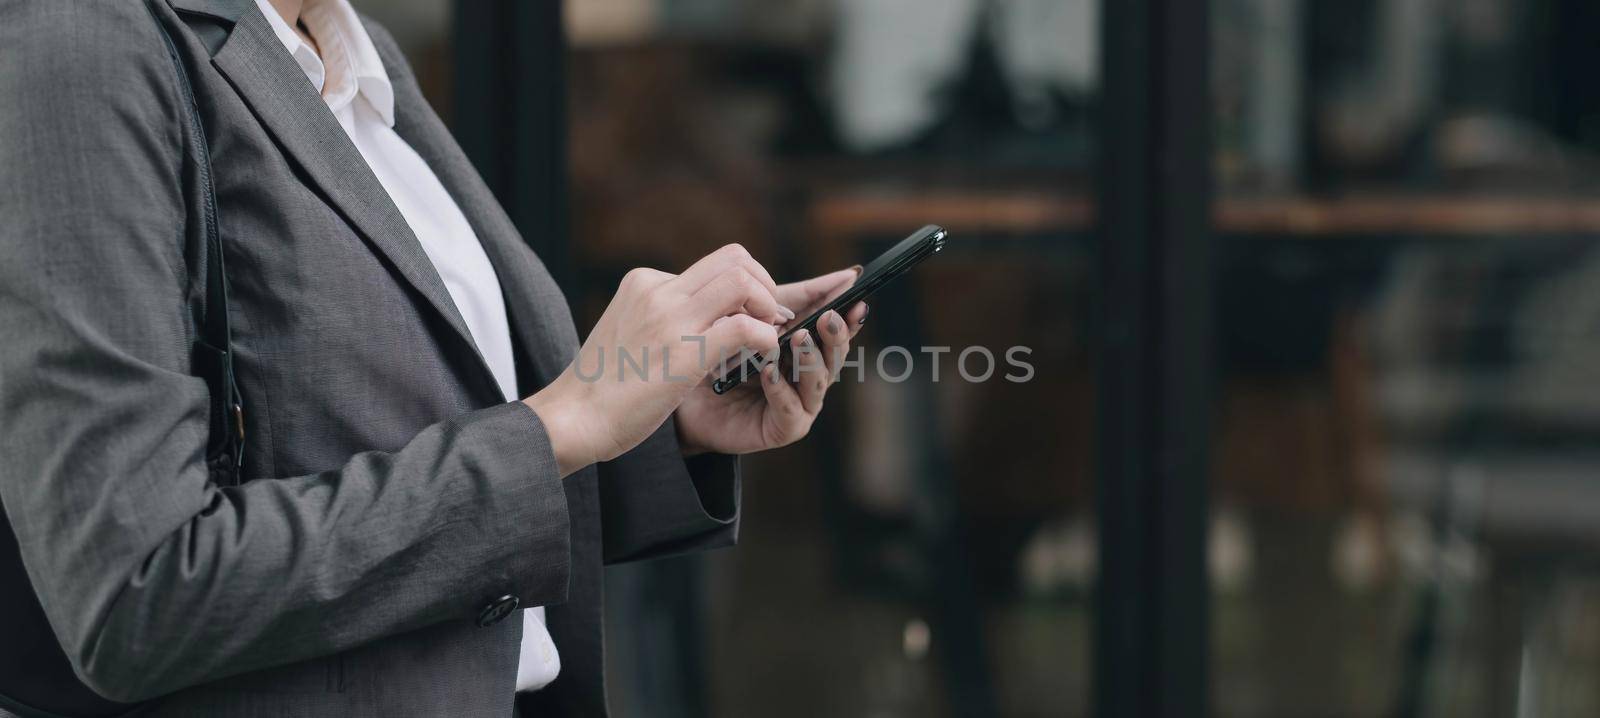 woman using apps on a mobile touchscreen smartphone. Concept for using technology, shopping online, mobile apps, texting, addiction, swipe up, swipe down. by wichayada